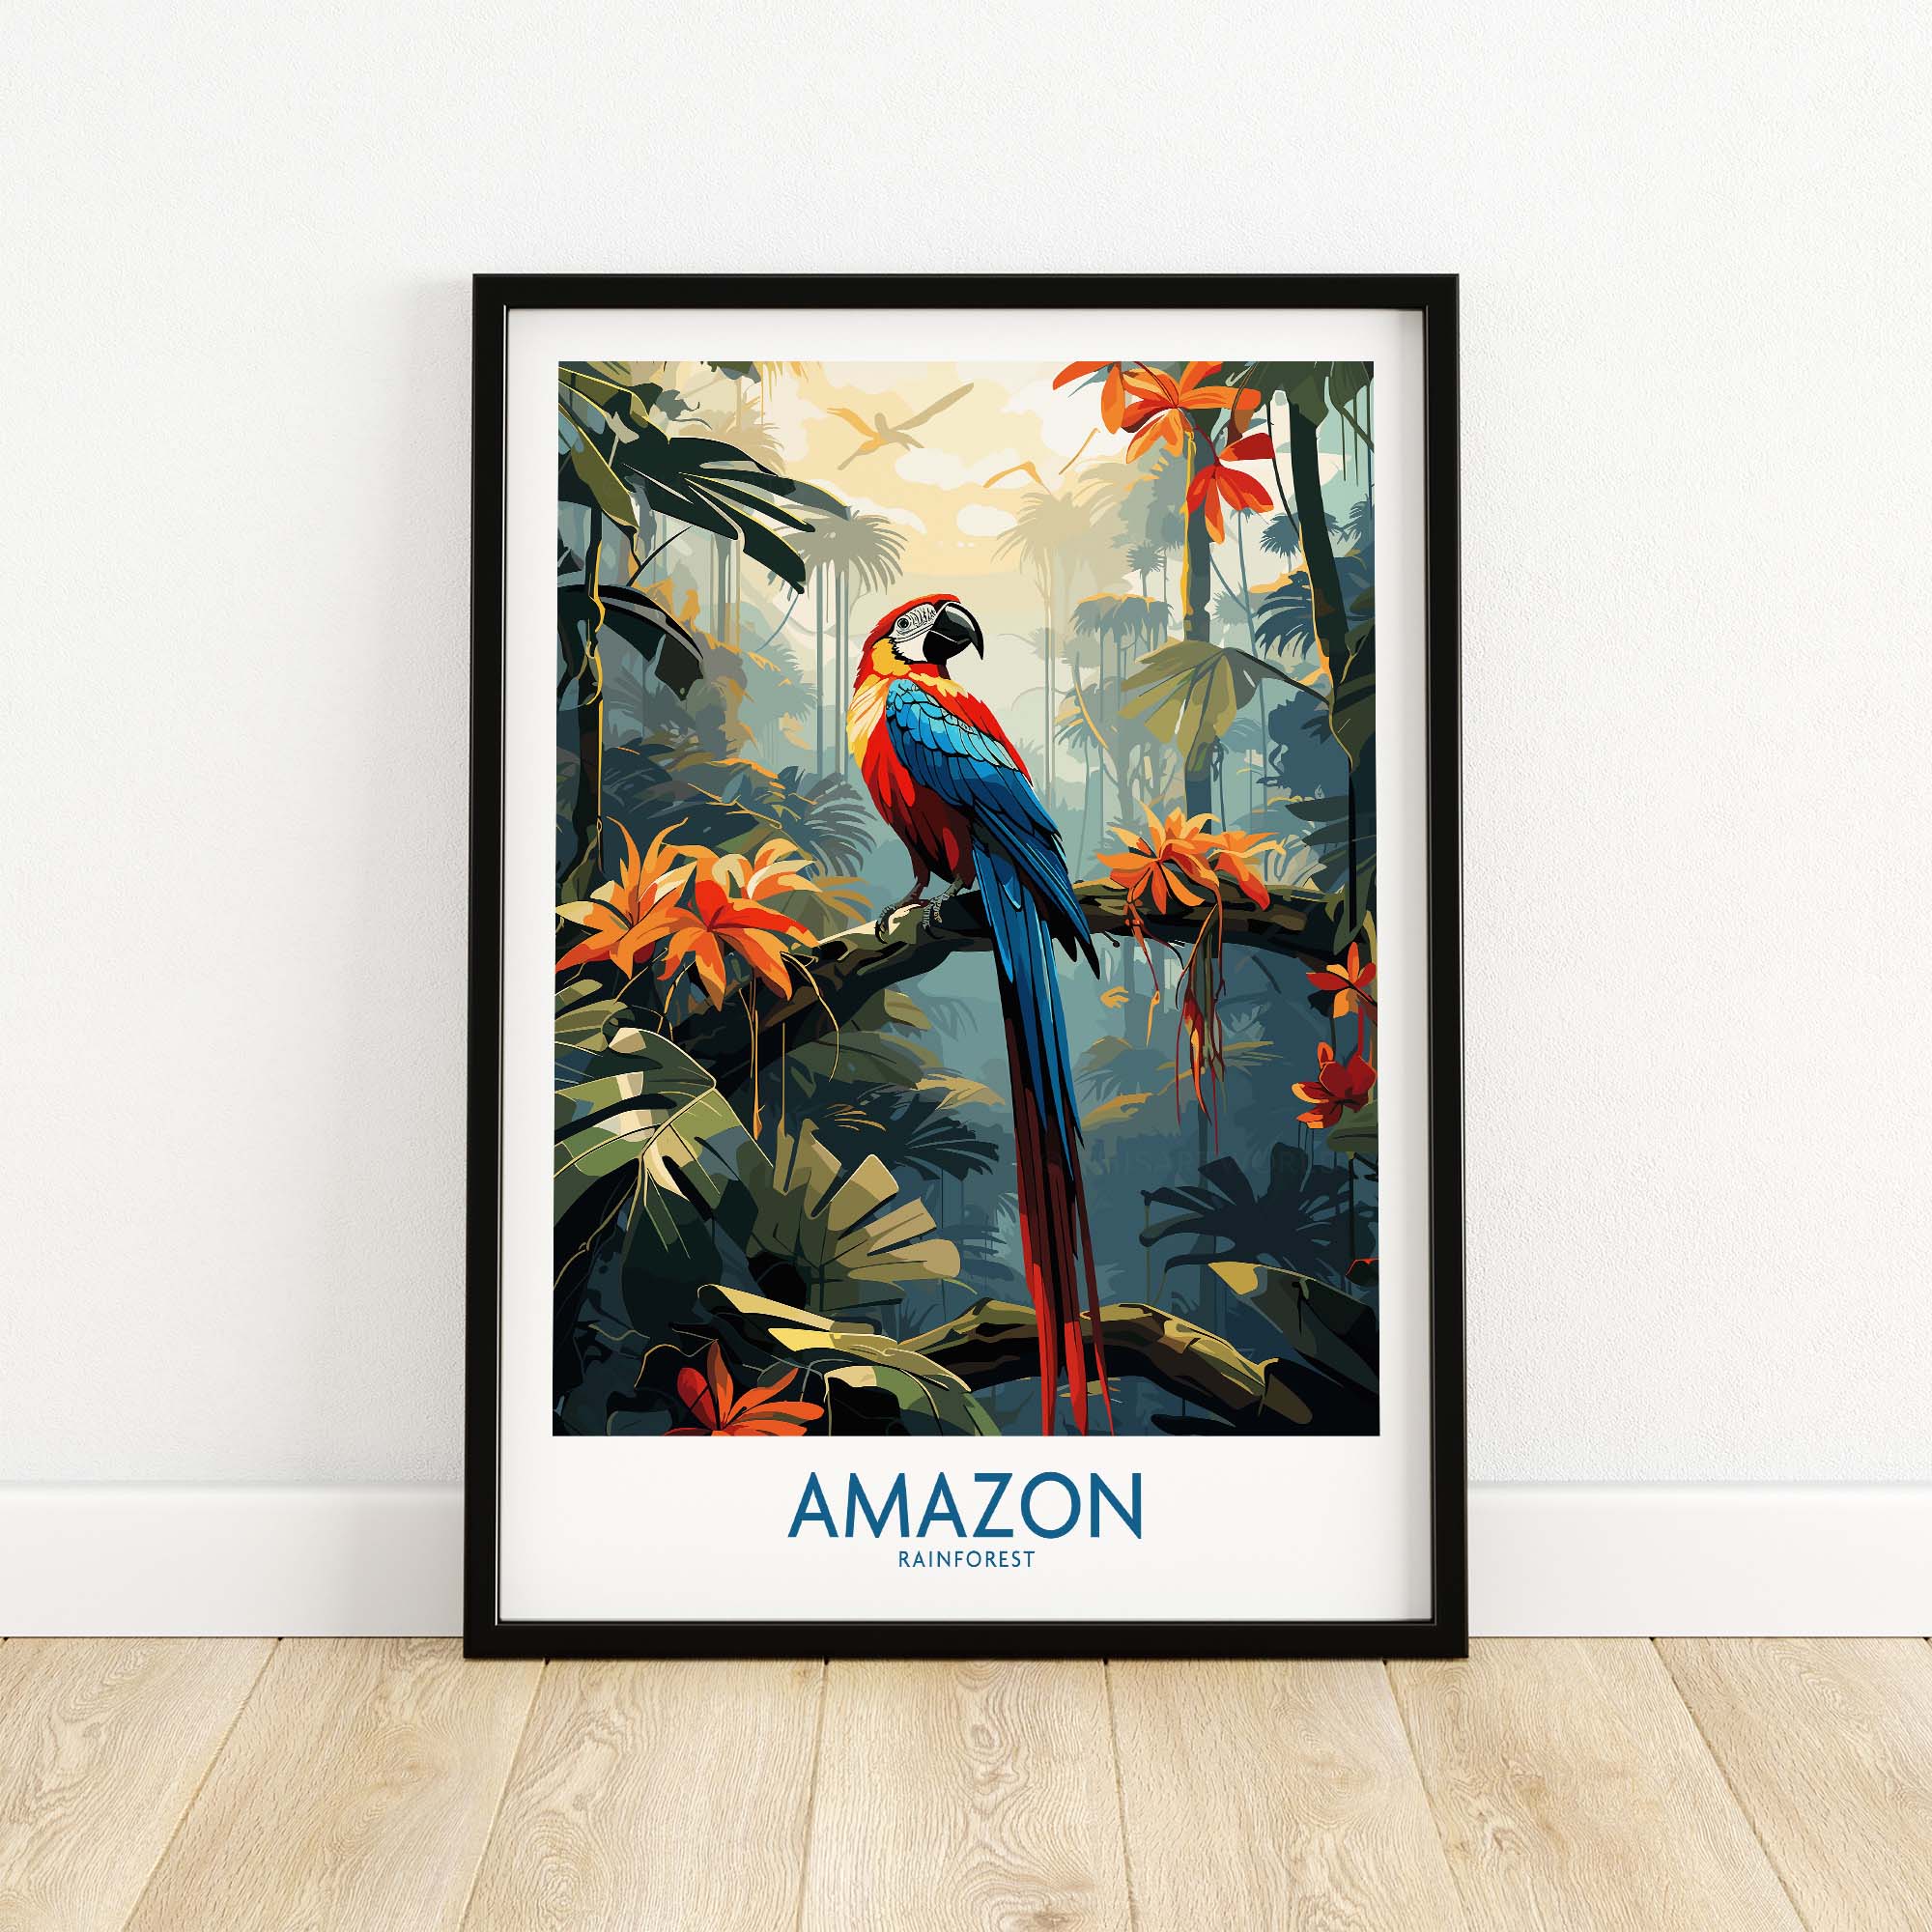 The Amazon Rainforest Poster part of our best collection or travel posters and prints - This Art World